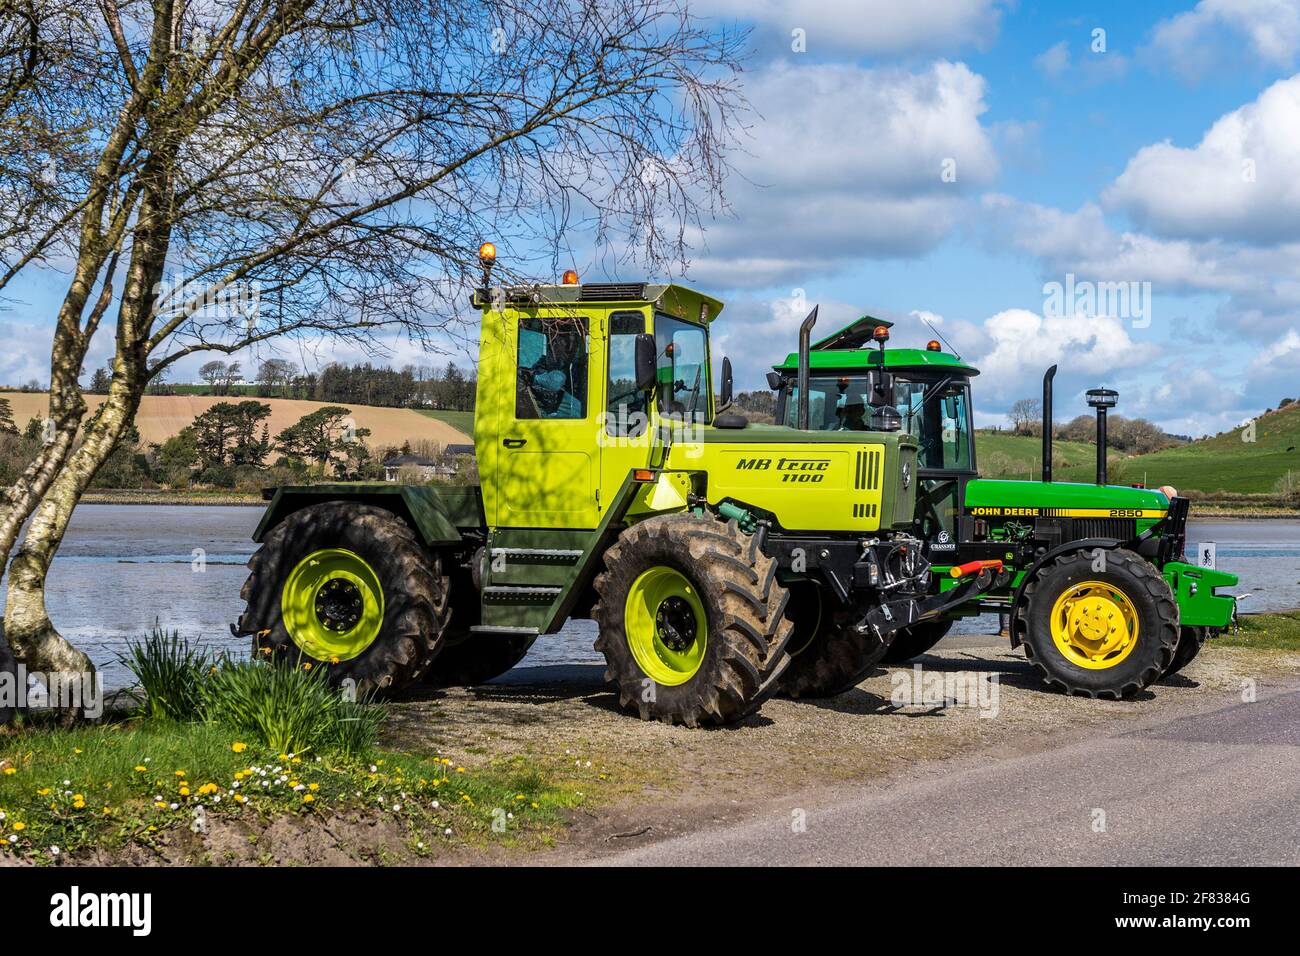 Timoleague, West Cork, Ireland. 11th Apr, 2021. Two vintage tractors enjoy the sun in and around the West Cork village of Timoleague on a beautiful sunny day. The tractors, a 1990 Mercedes MB Trac 1100 and a 1992 John Deere 2850 are owned by farmers David Deasy and Paudie O'Leary, who both live in Timoleague. Credit: AG News/Alamy Live News Stock Photo